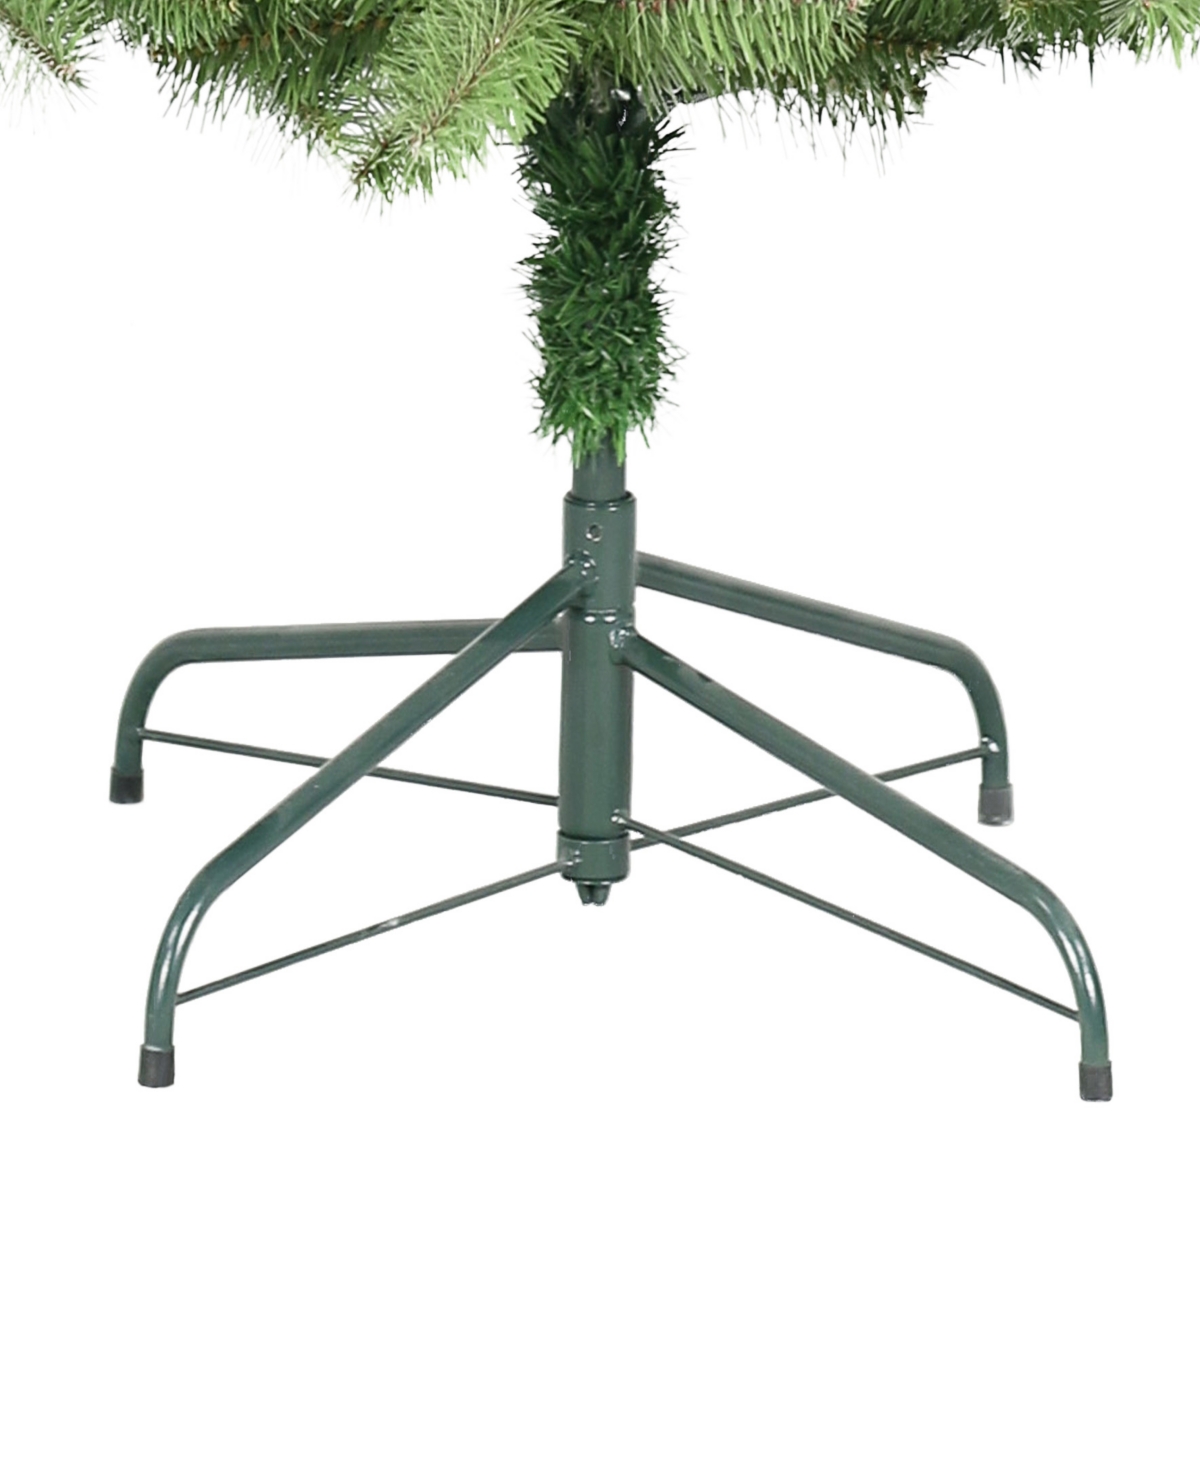 Shop Puleo 6.5' Pre-lit Slim Flocked Royal Majestic Artificial Spruce Tree In Green